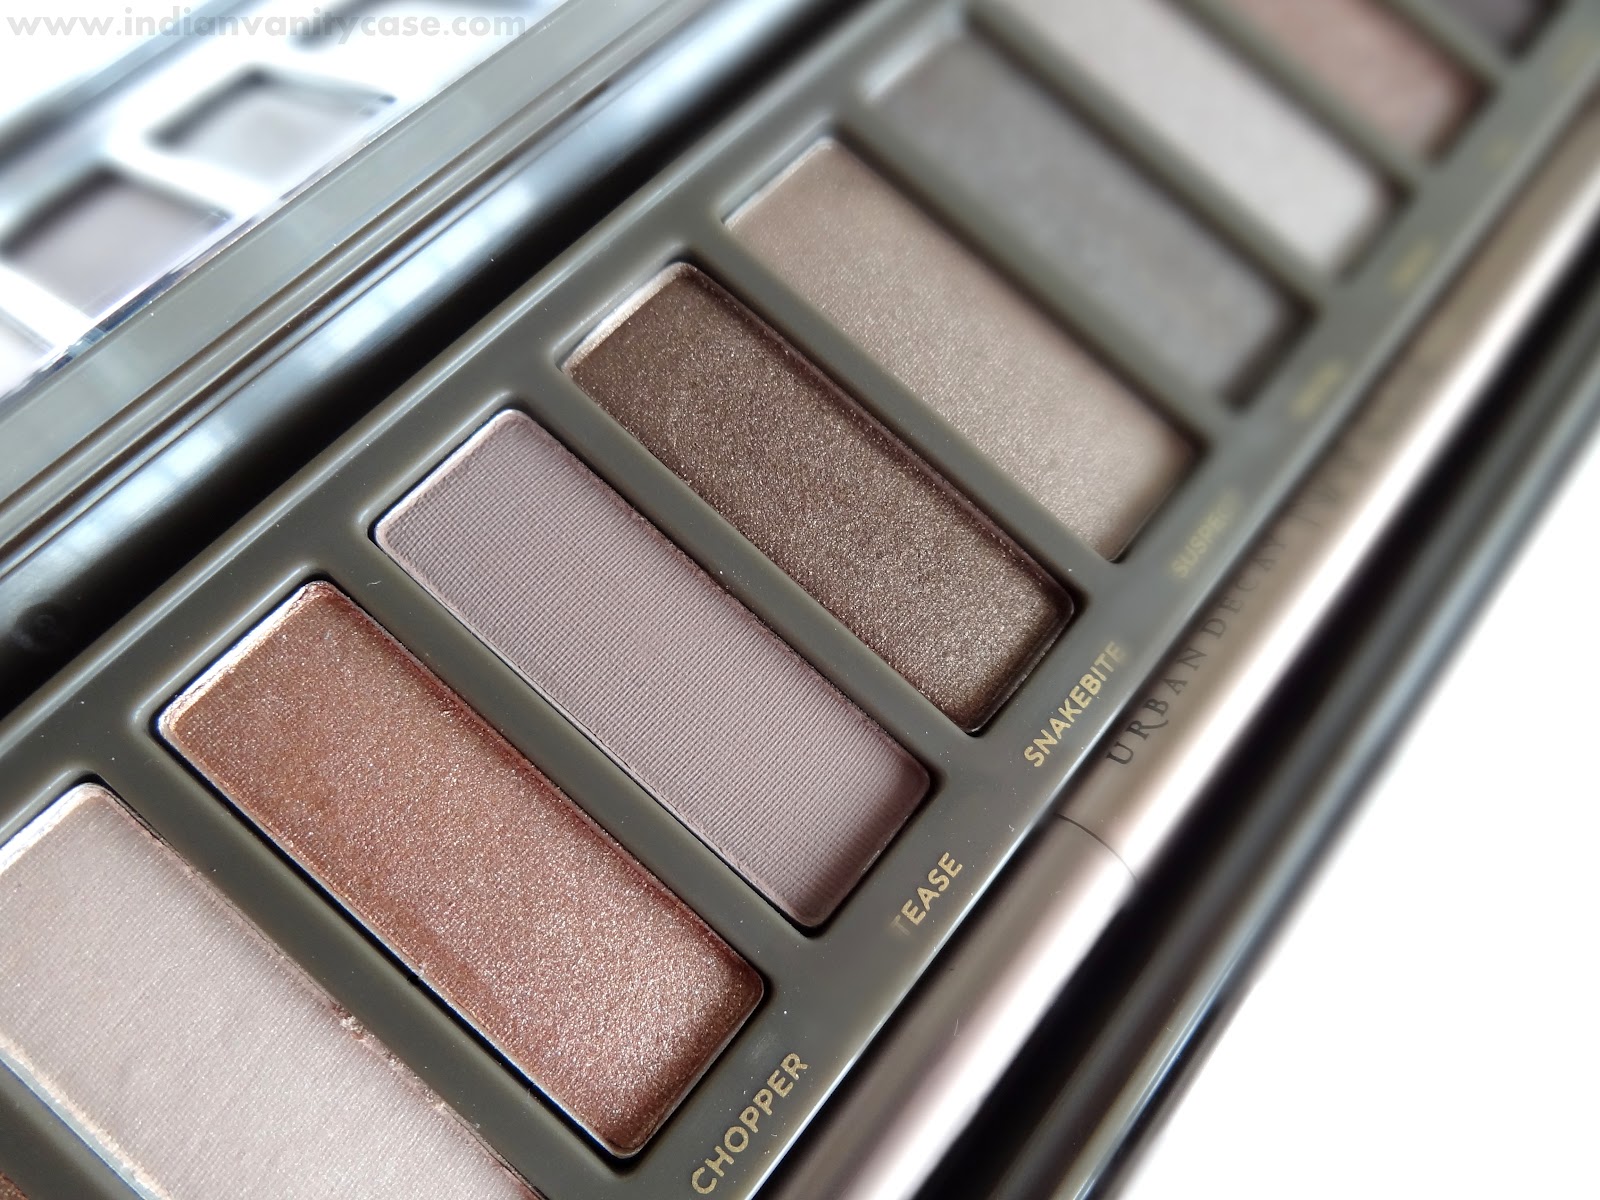 A Cynful Fiction: Urban Decay Naked 2 Palette Review & Swatches